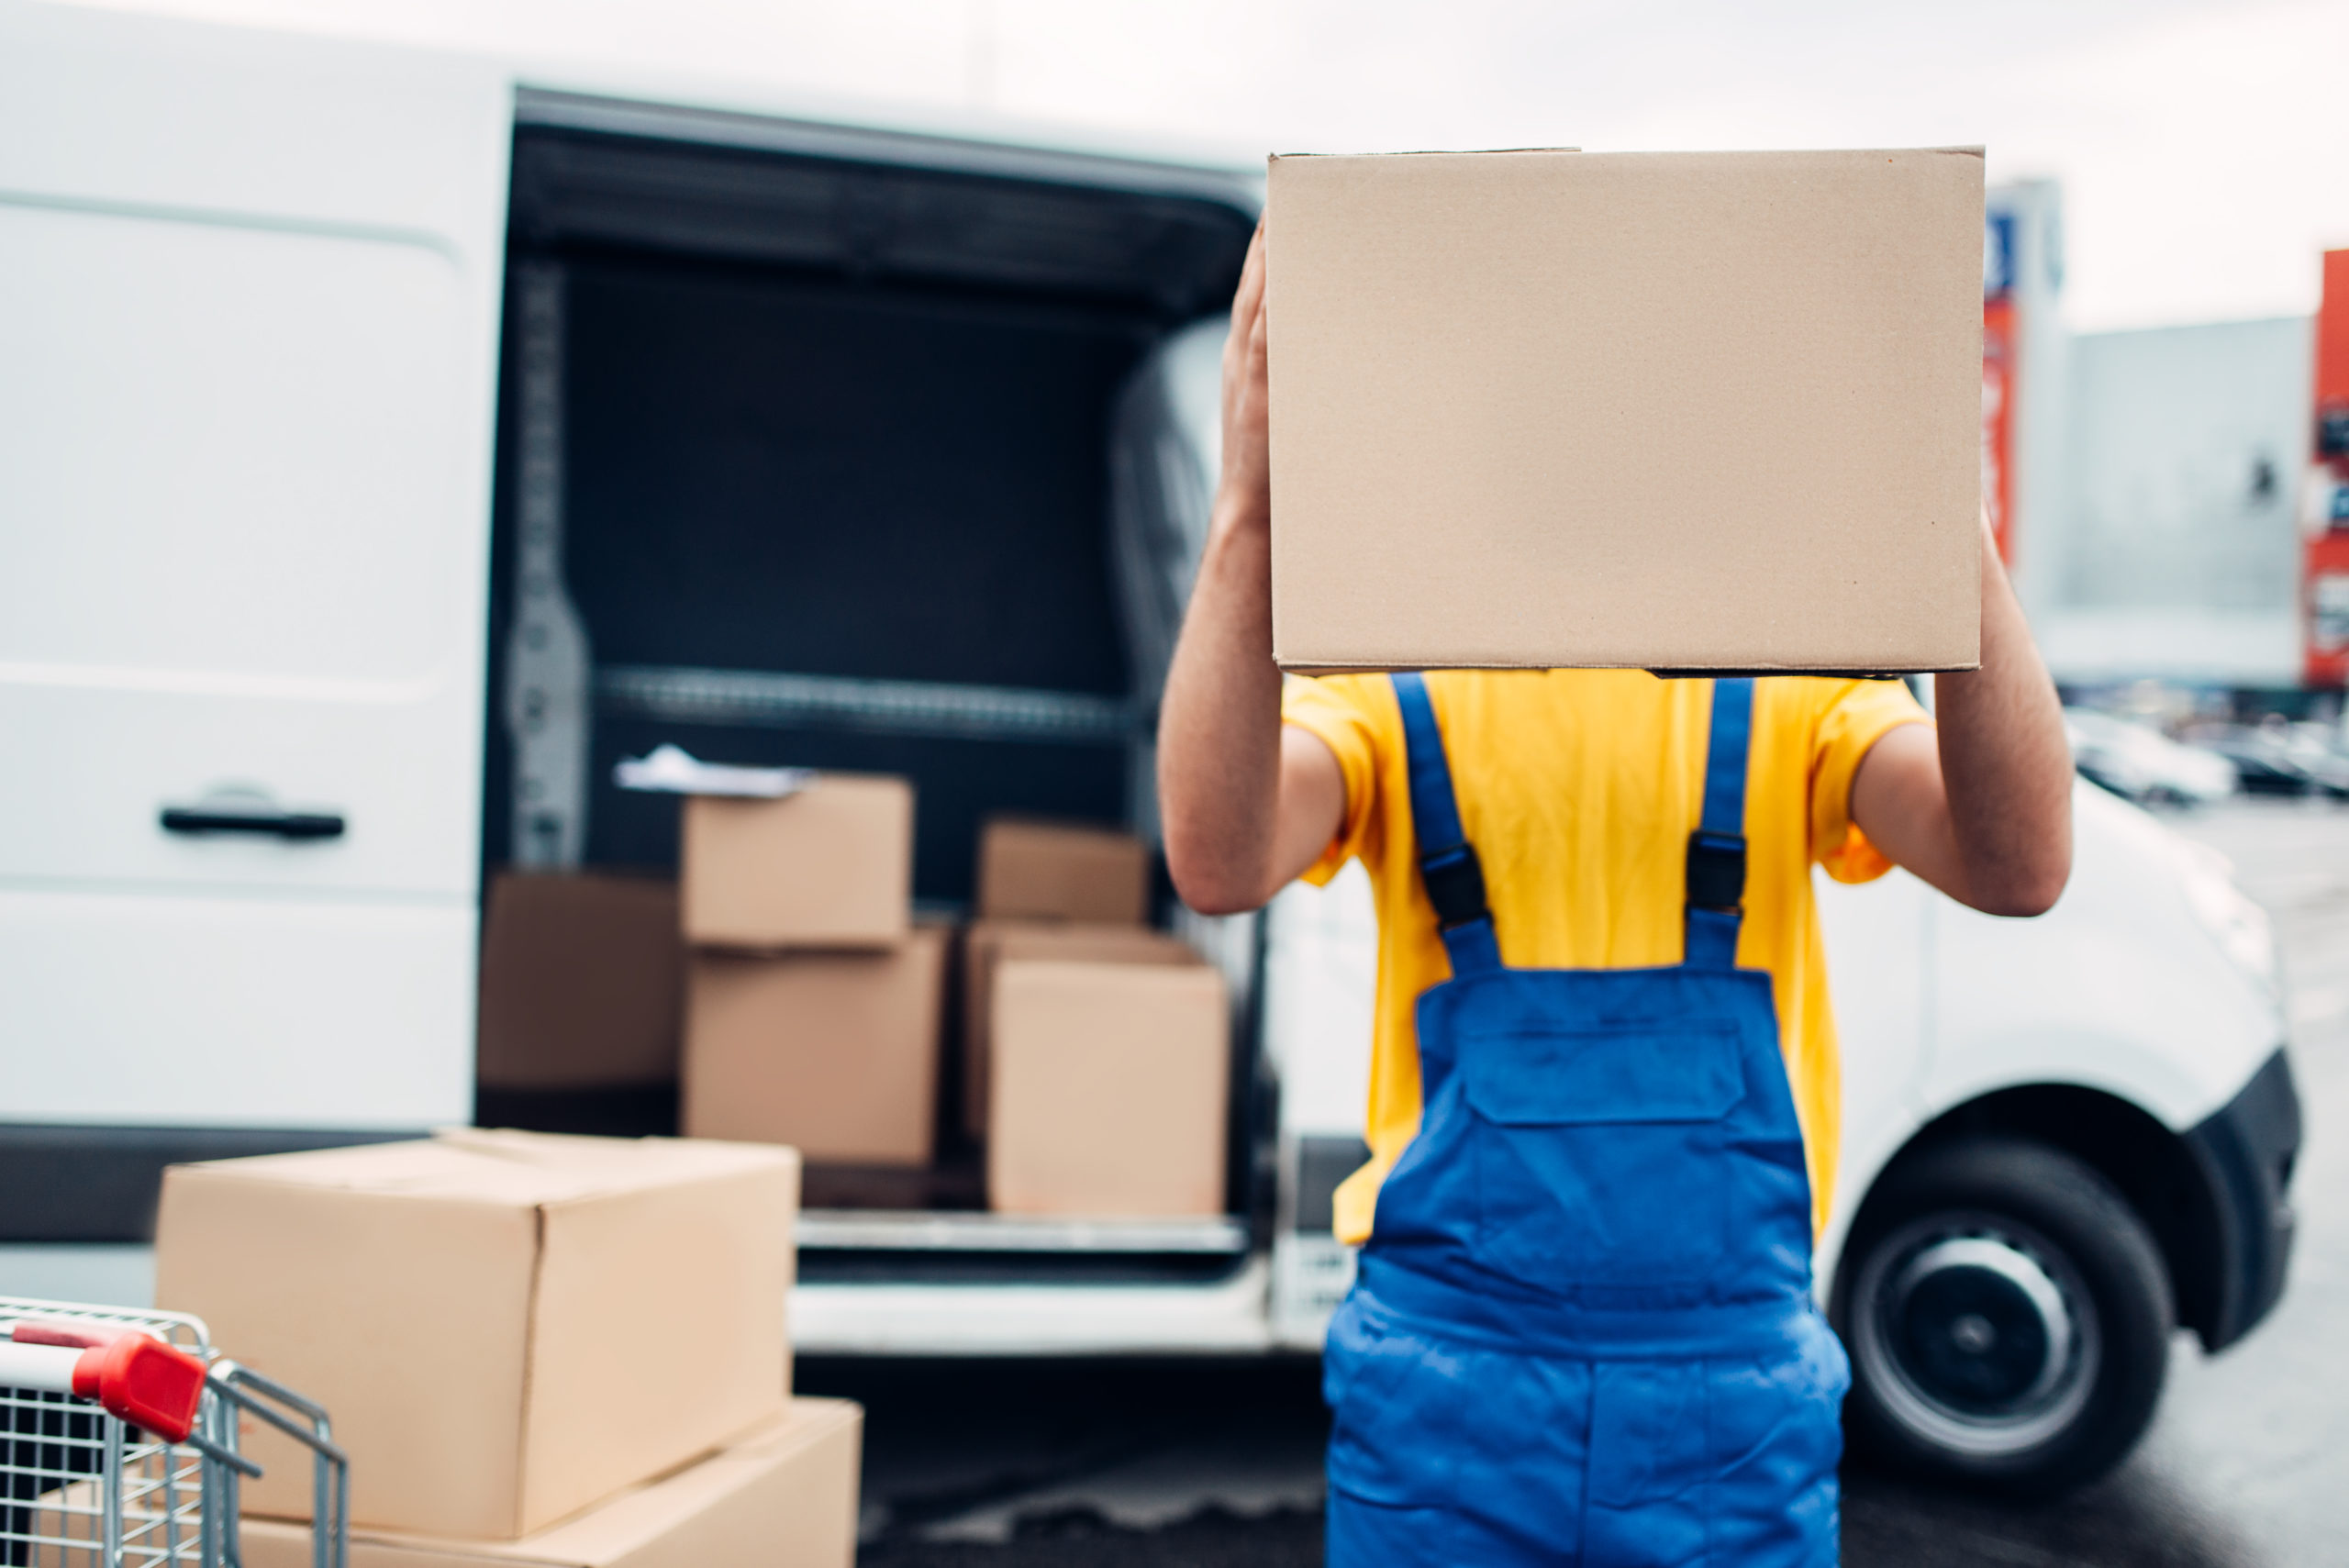 5 Benefits of Moving During the Spring